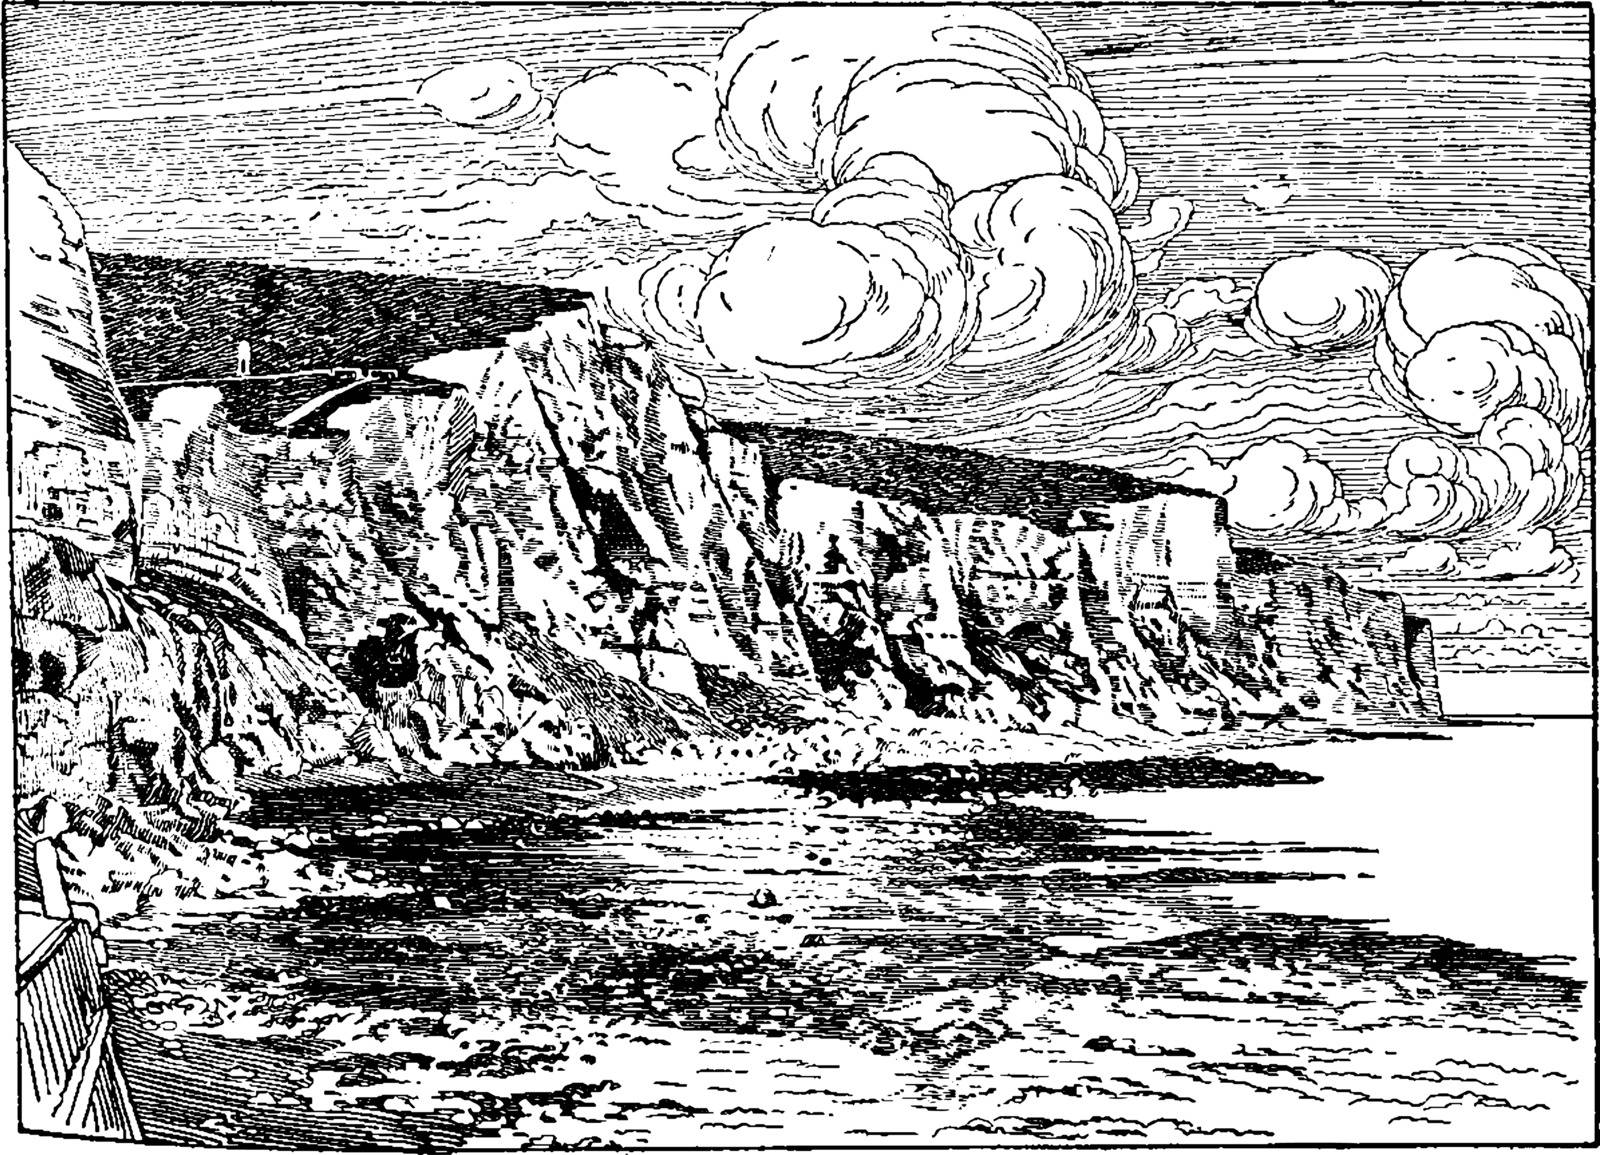 The Cliffs of Dover have served as a symbolic guard against any attacks and threats coming in from Continental Europe, vintage line drawing or engraving illustration.